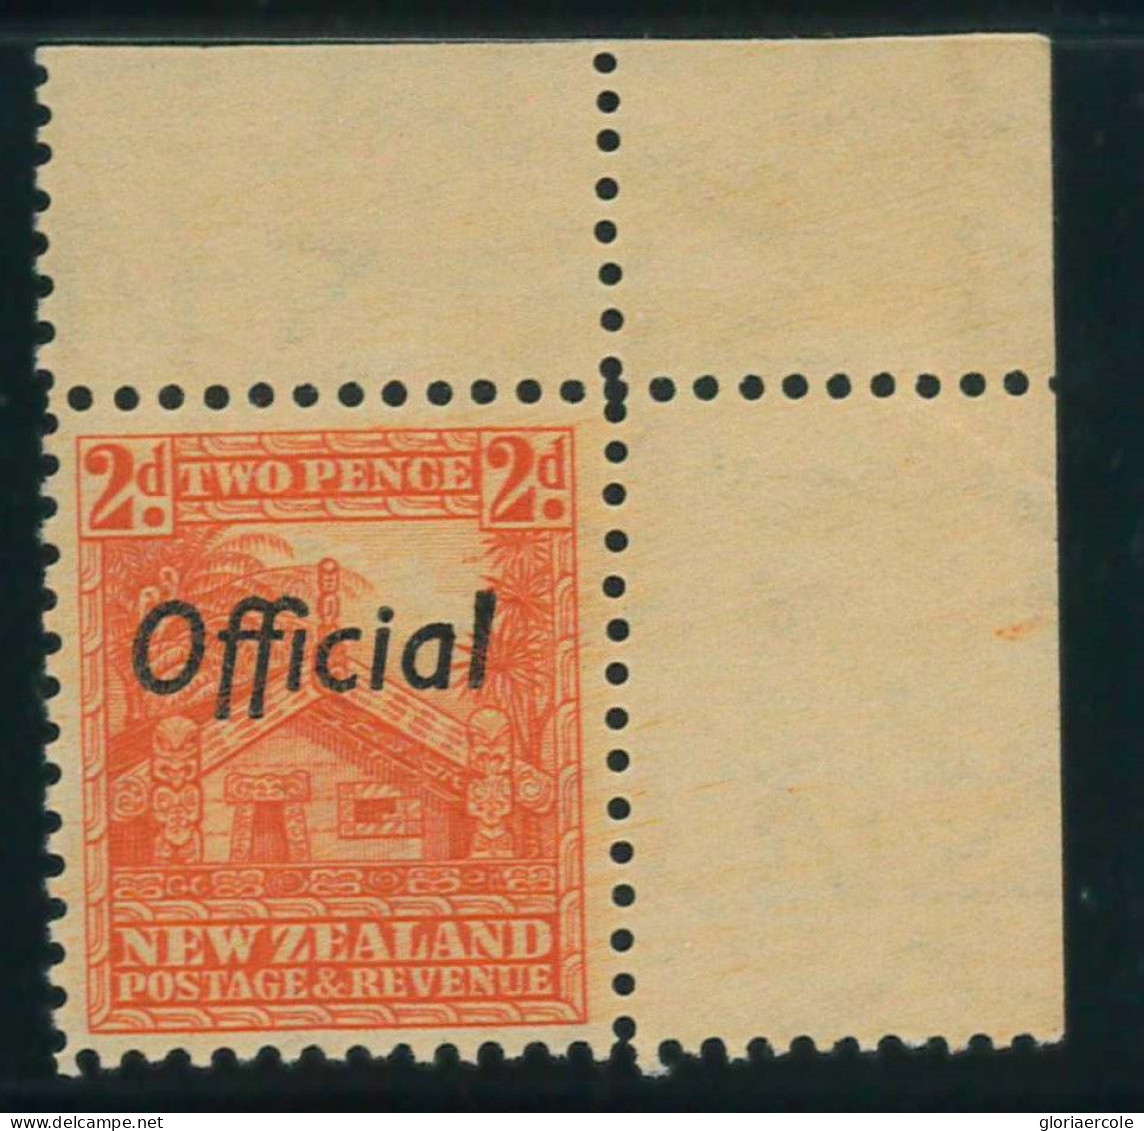 P3081 C - NEW ZEALAND, OFFICIAL STAMP S.GIBBONS, 0123 B MNH - Servizio